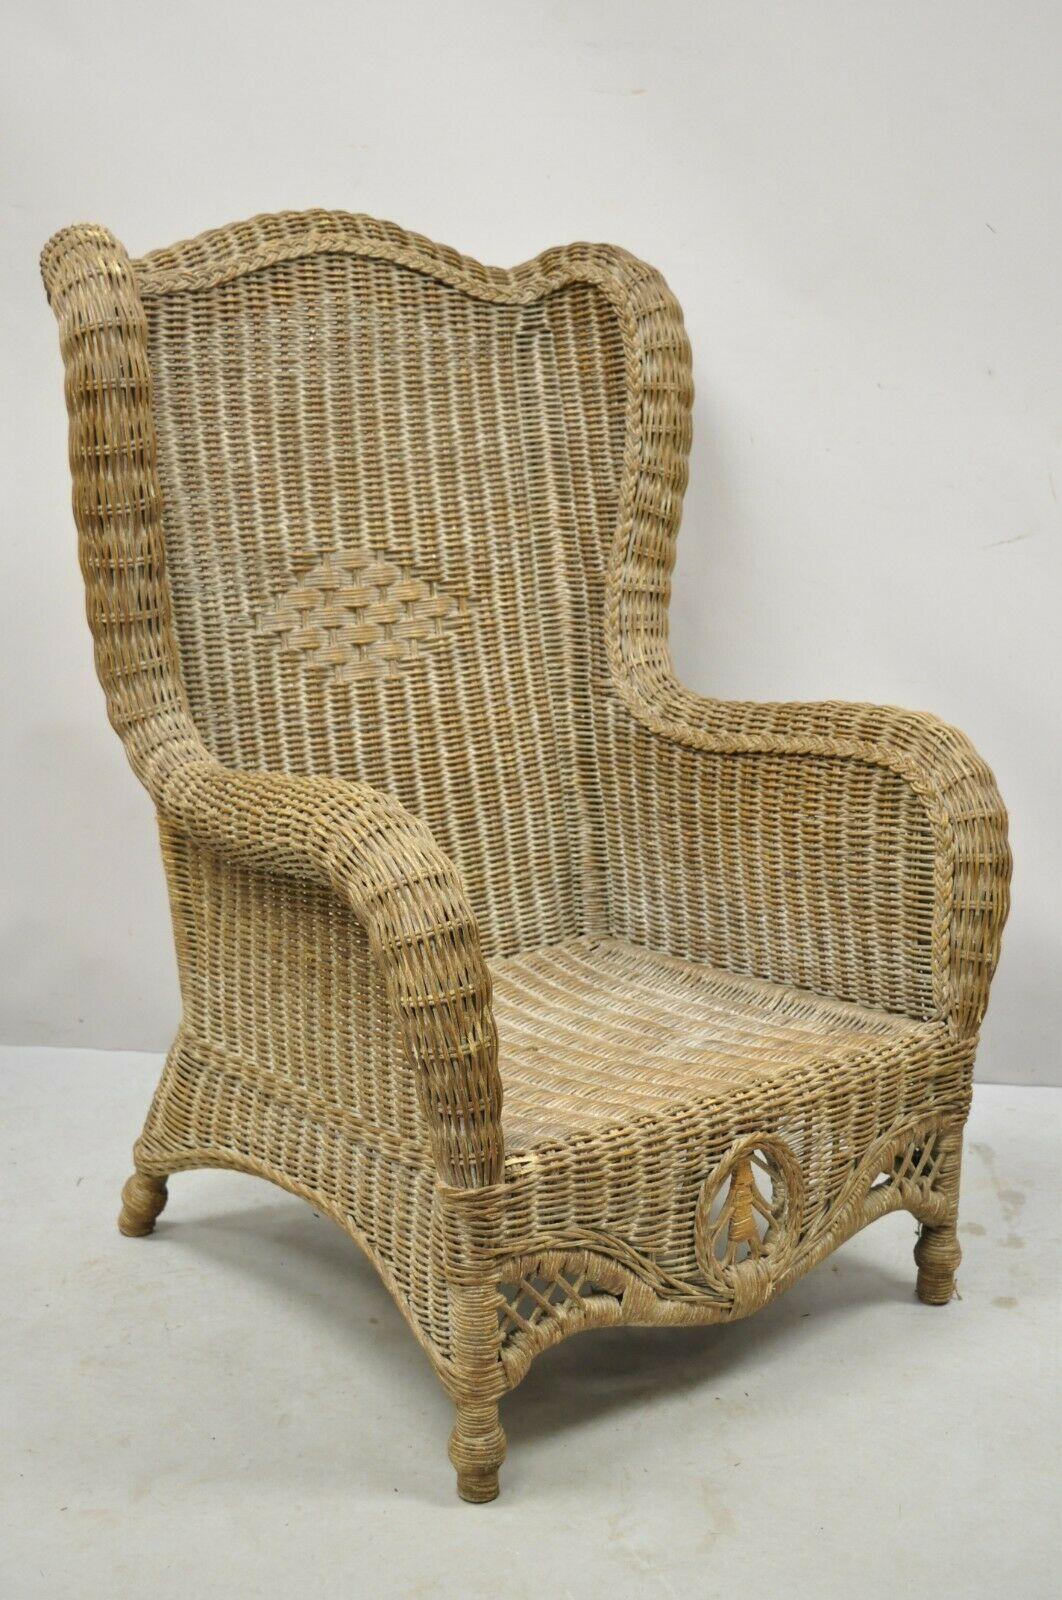 Large Woven Wicker Rattan Victorian Style Wingback Lounge Arm Chair For Sale 4